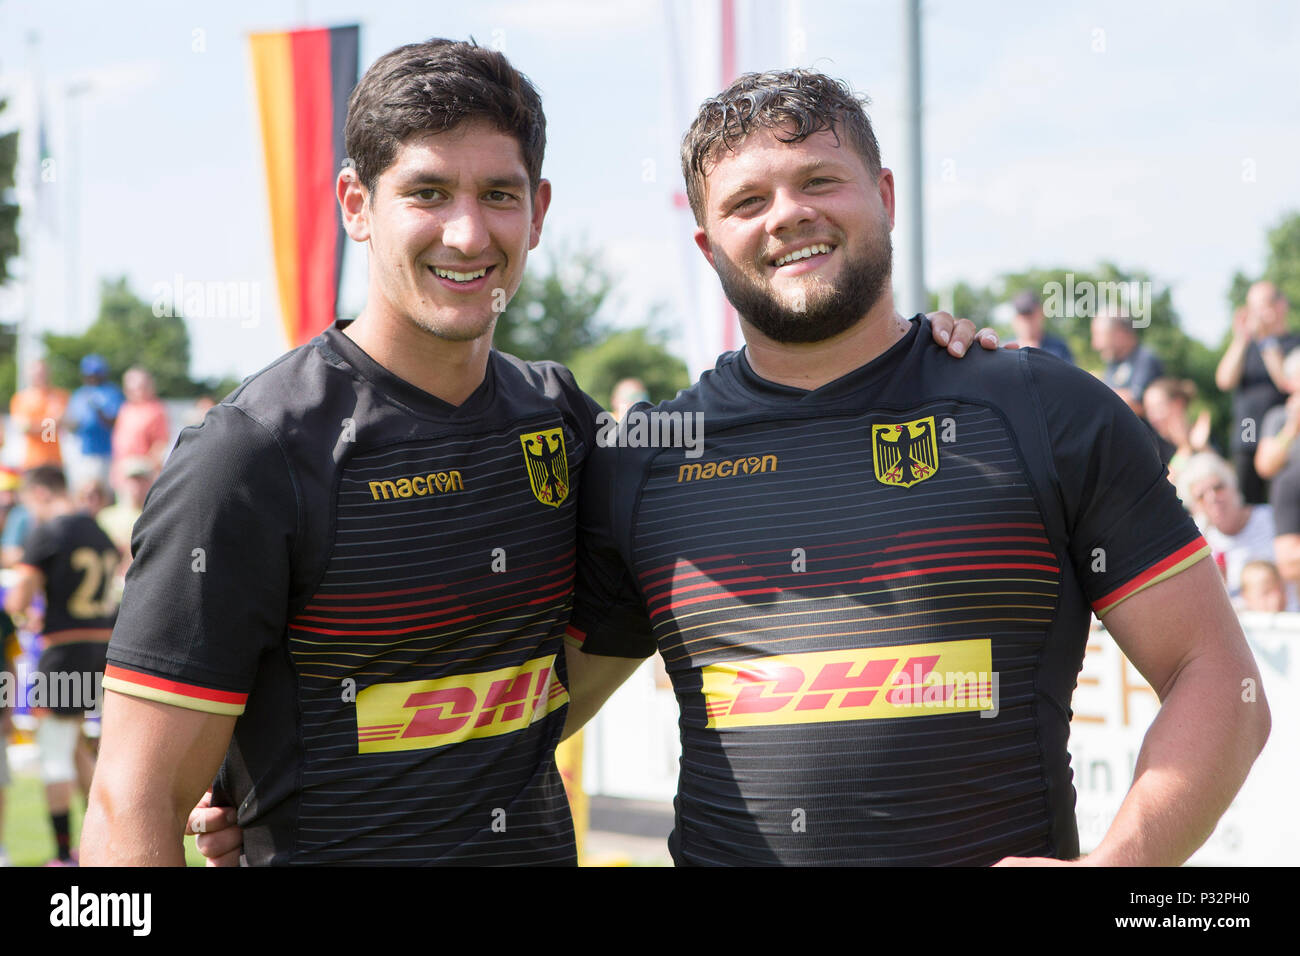 16 June 2018, Germany, Heidelberg: Qualification match for the 2019 Rugby  World Cup in Japan, Germany